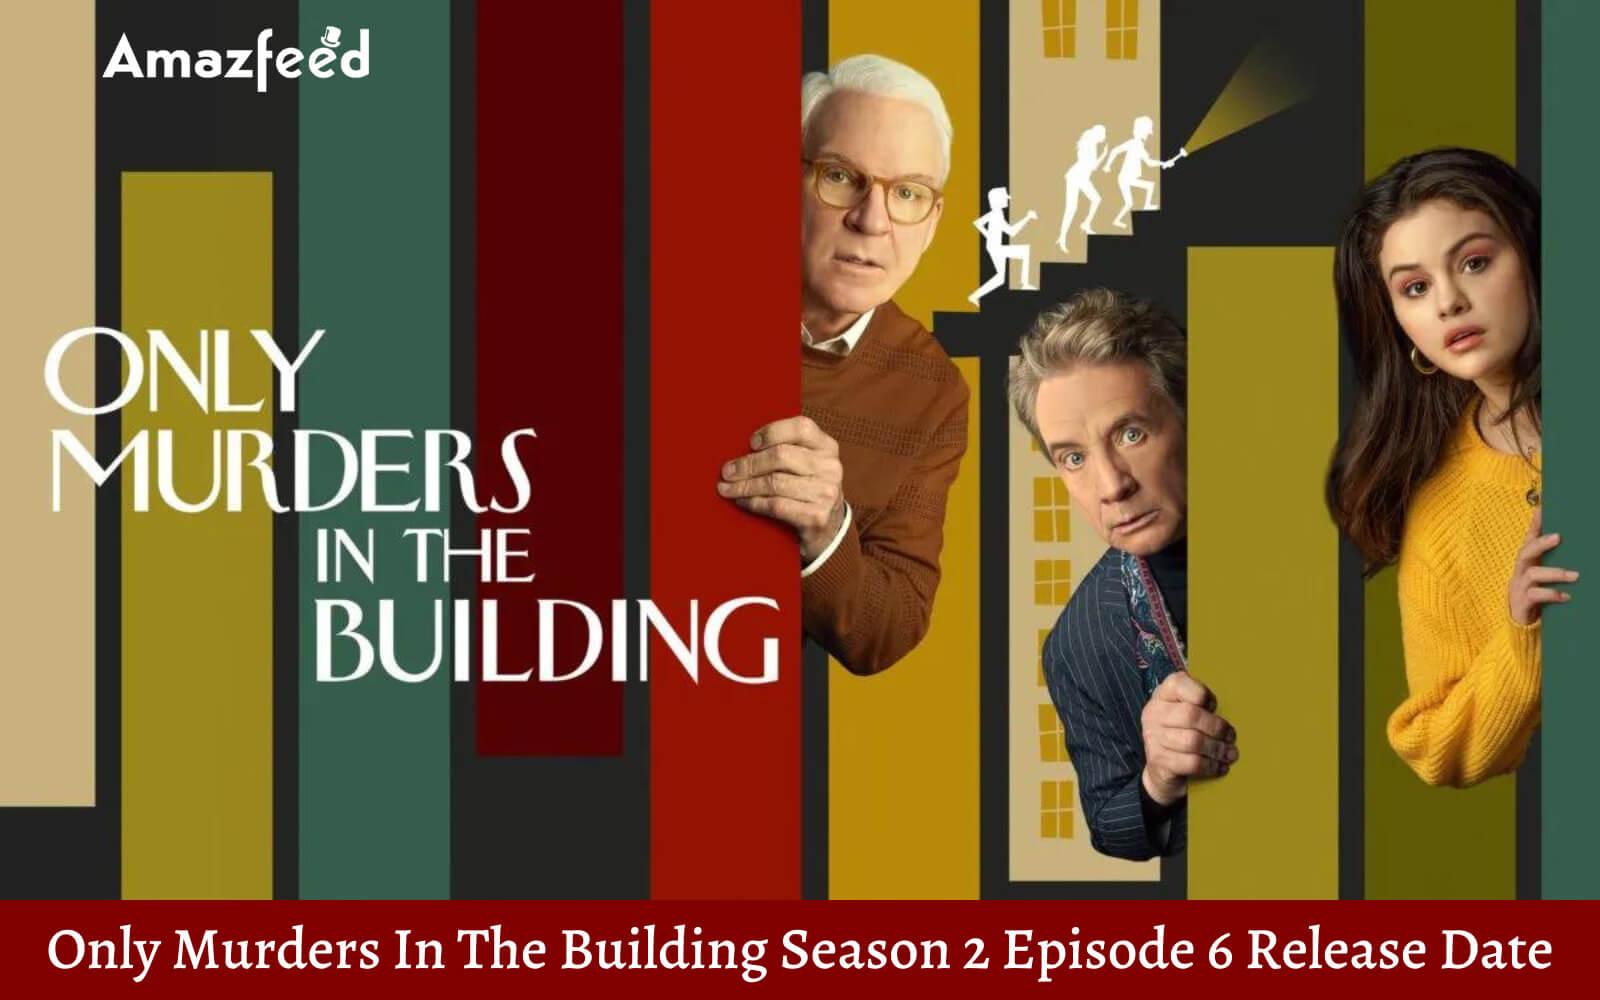 Only Murders In The Building Season 2 Episode 6 Release Date